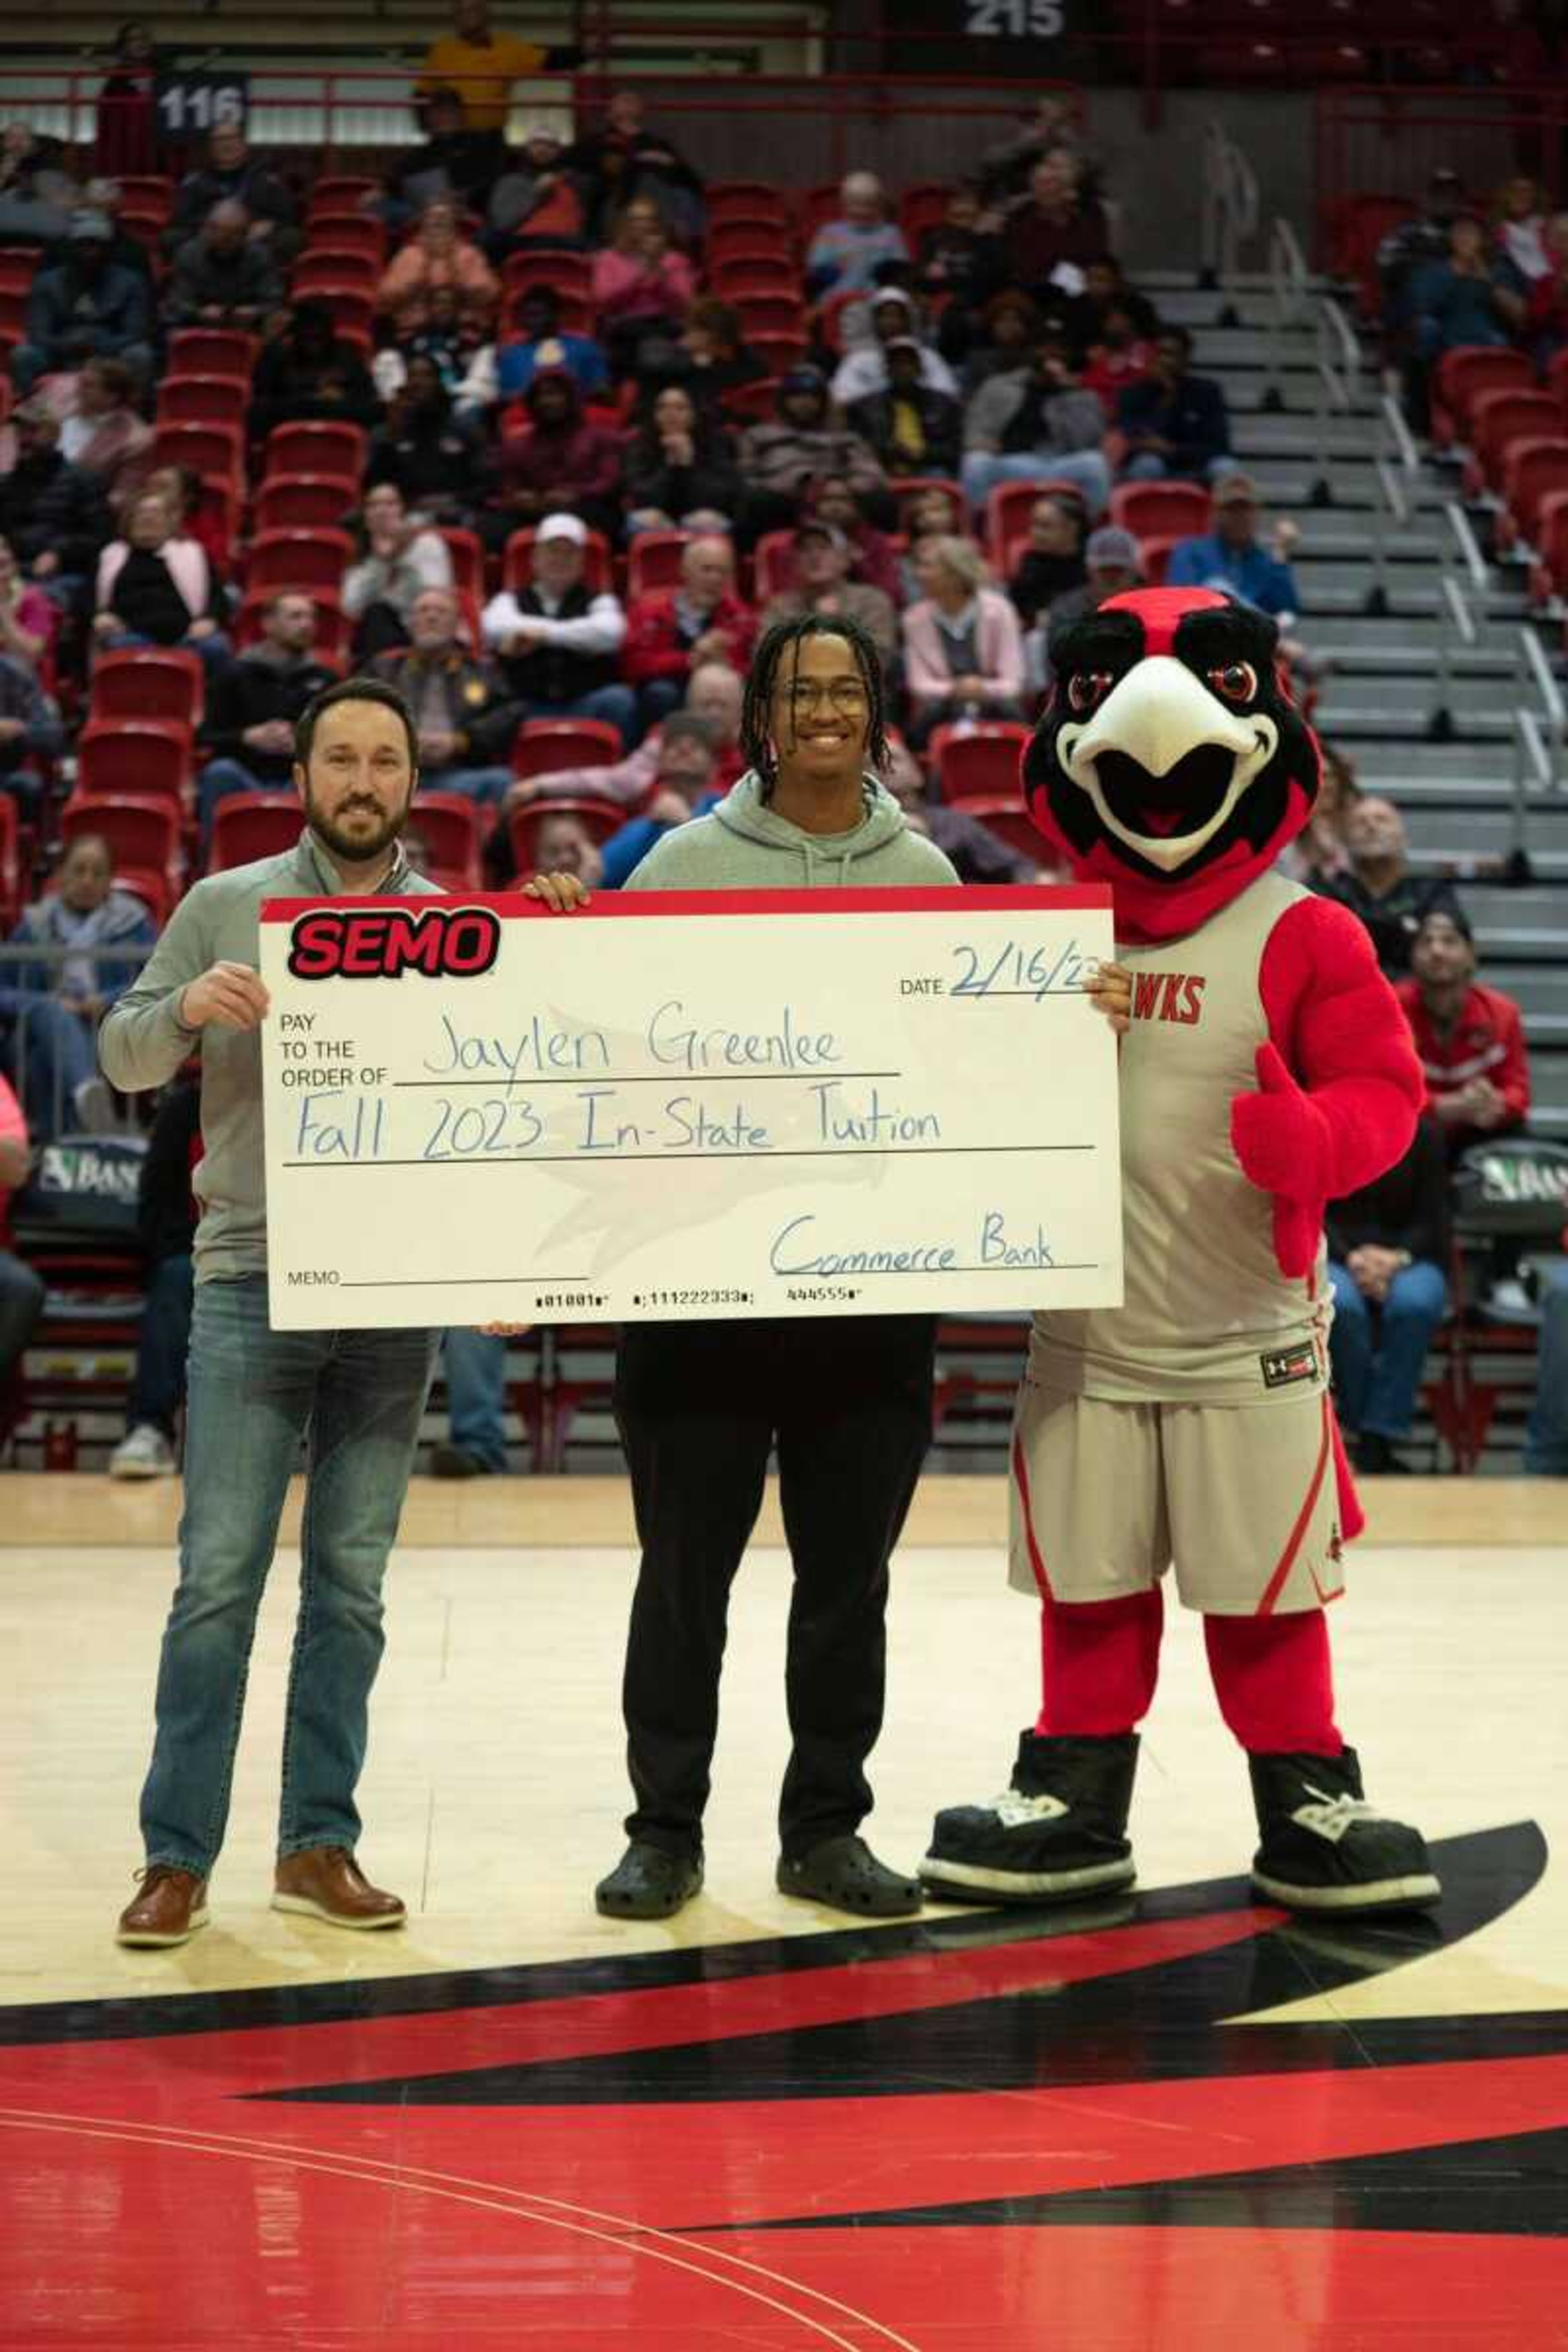 Rowdy and Commerce Bank present 12 credits worth of free tuition to junior biomedical science major Jaylen Greenlee. Students received tickets to enter the tuition raffle if they arrived before halftime of the men’s basketball game on Feb. 16.